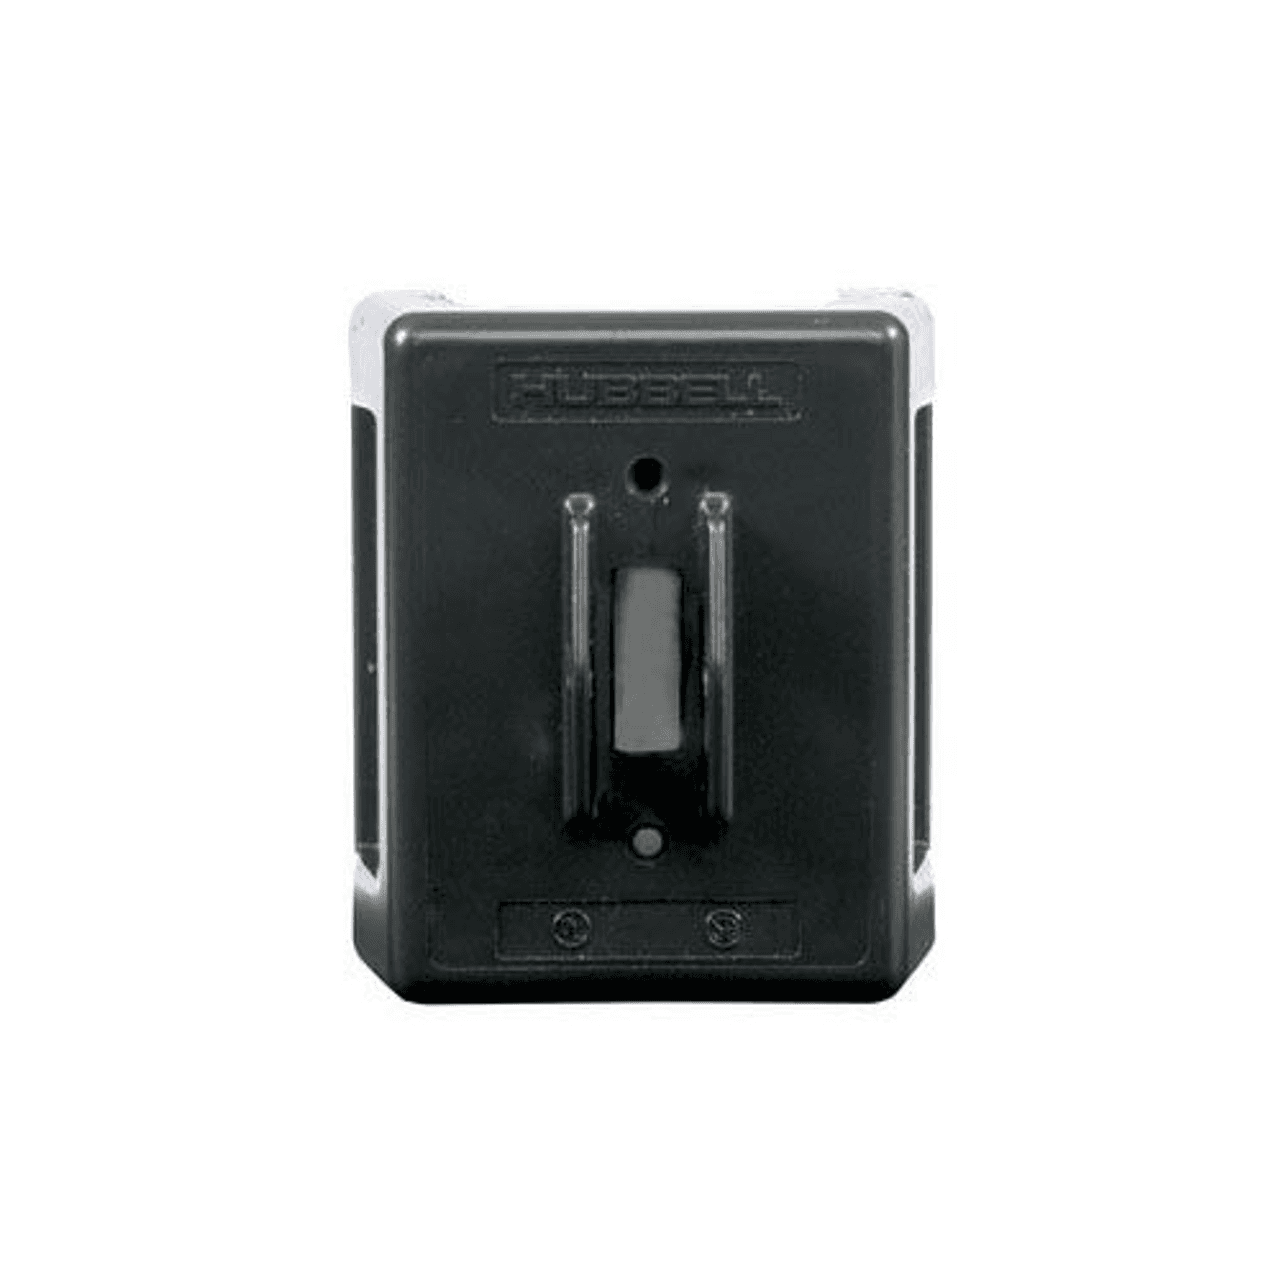 Hubbell HBL1390 Switches and Lighting Controls, Industrial Grade, Toggle Switches, Motor Disconnects, Non-Metallic NEMA 1 Enclosure, For 30A Devices , Black  ; All Aluminum Cover and Base ; Top, bottom or back wire entry points ; Base is pre-drilled for rear surface moun